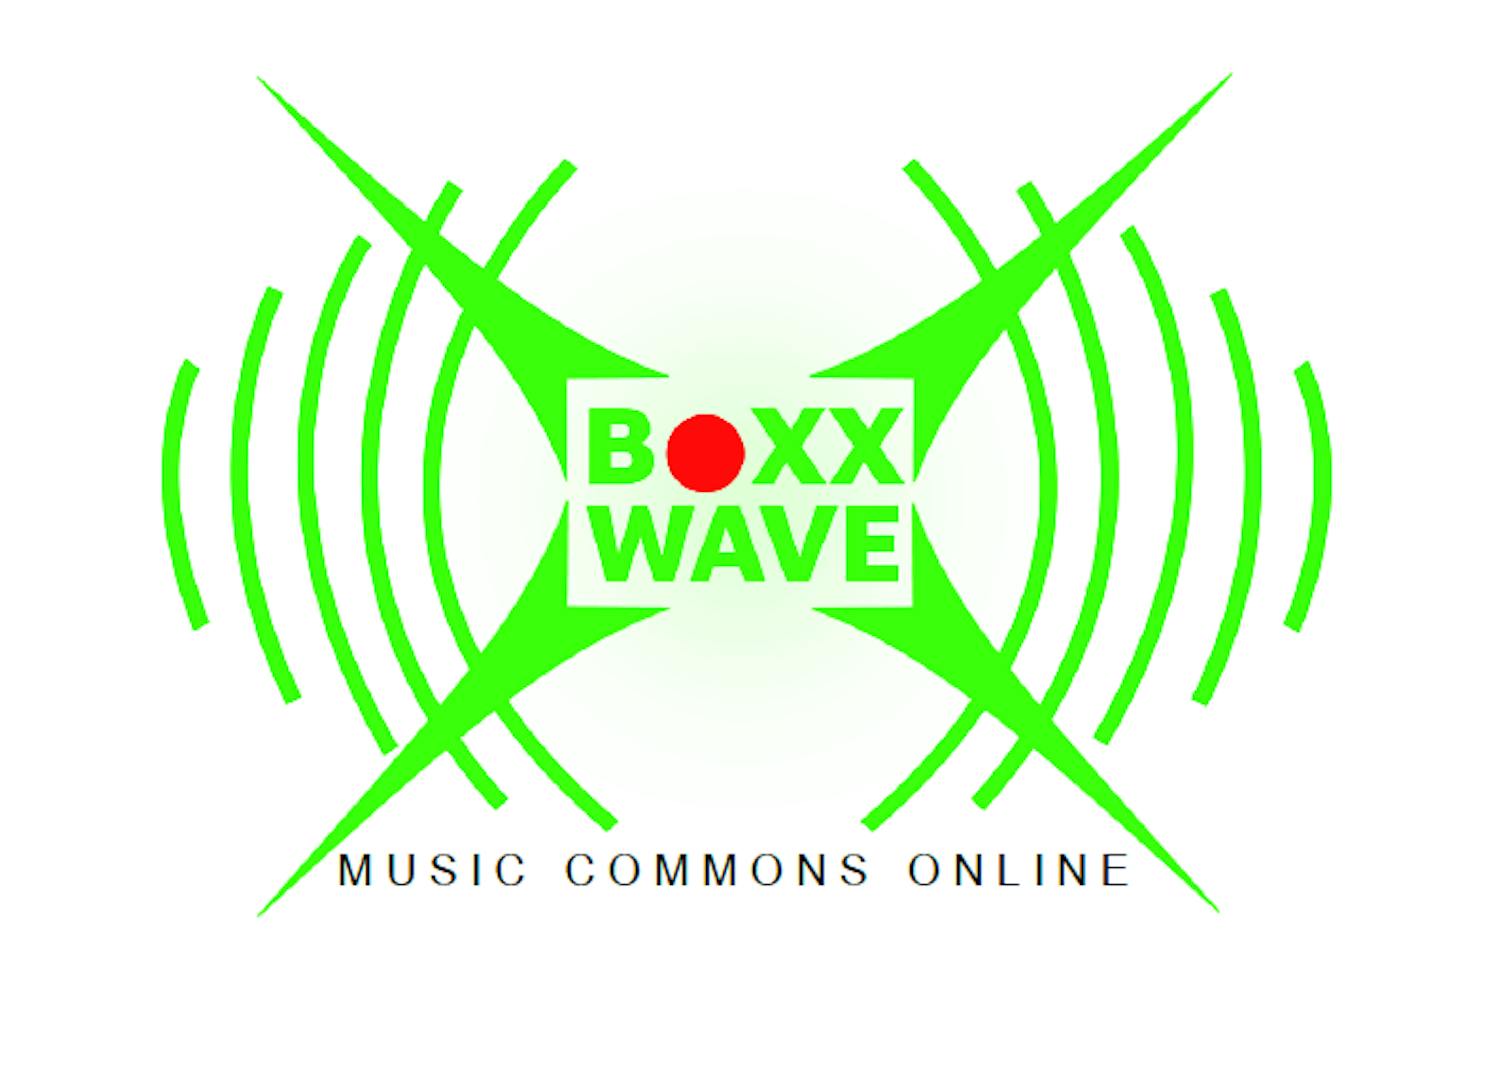 BoxxWave Music Commons Online